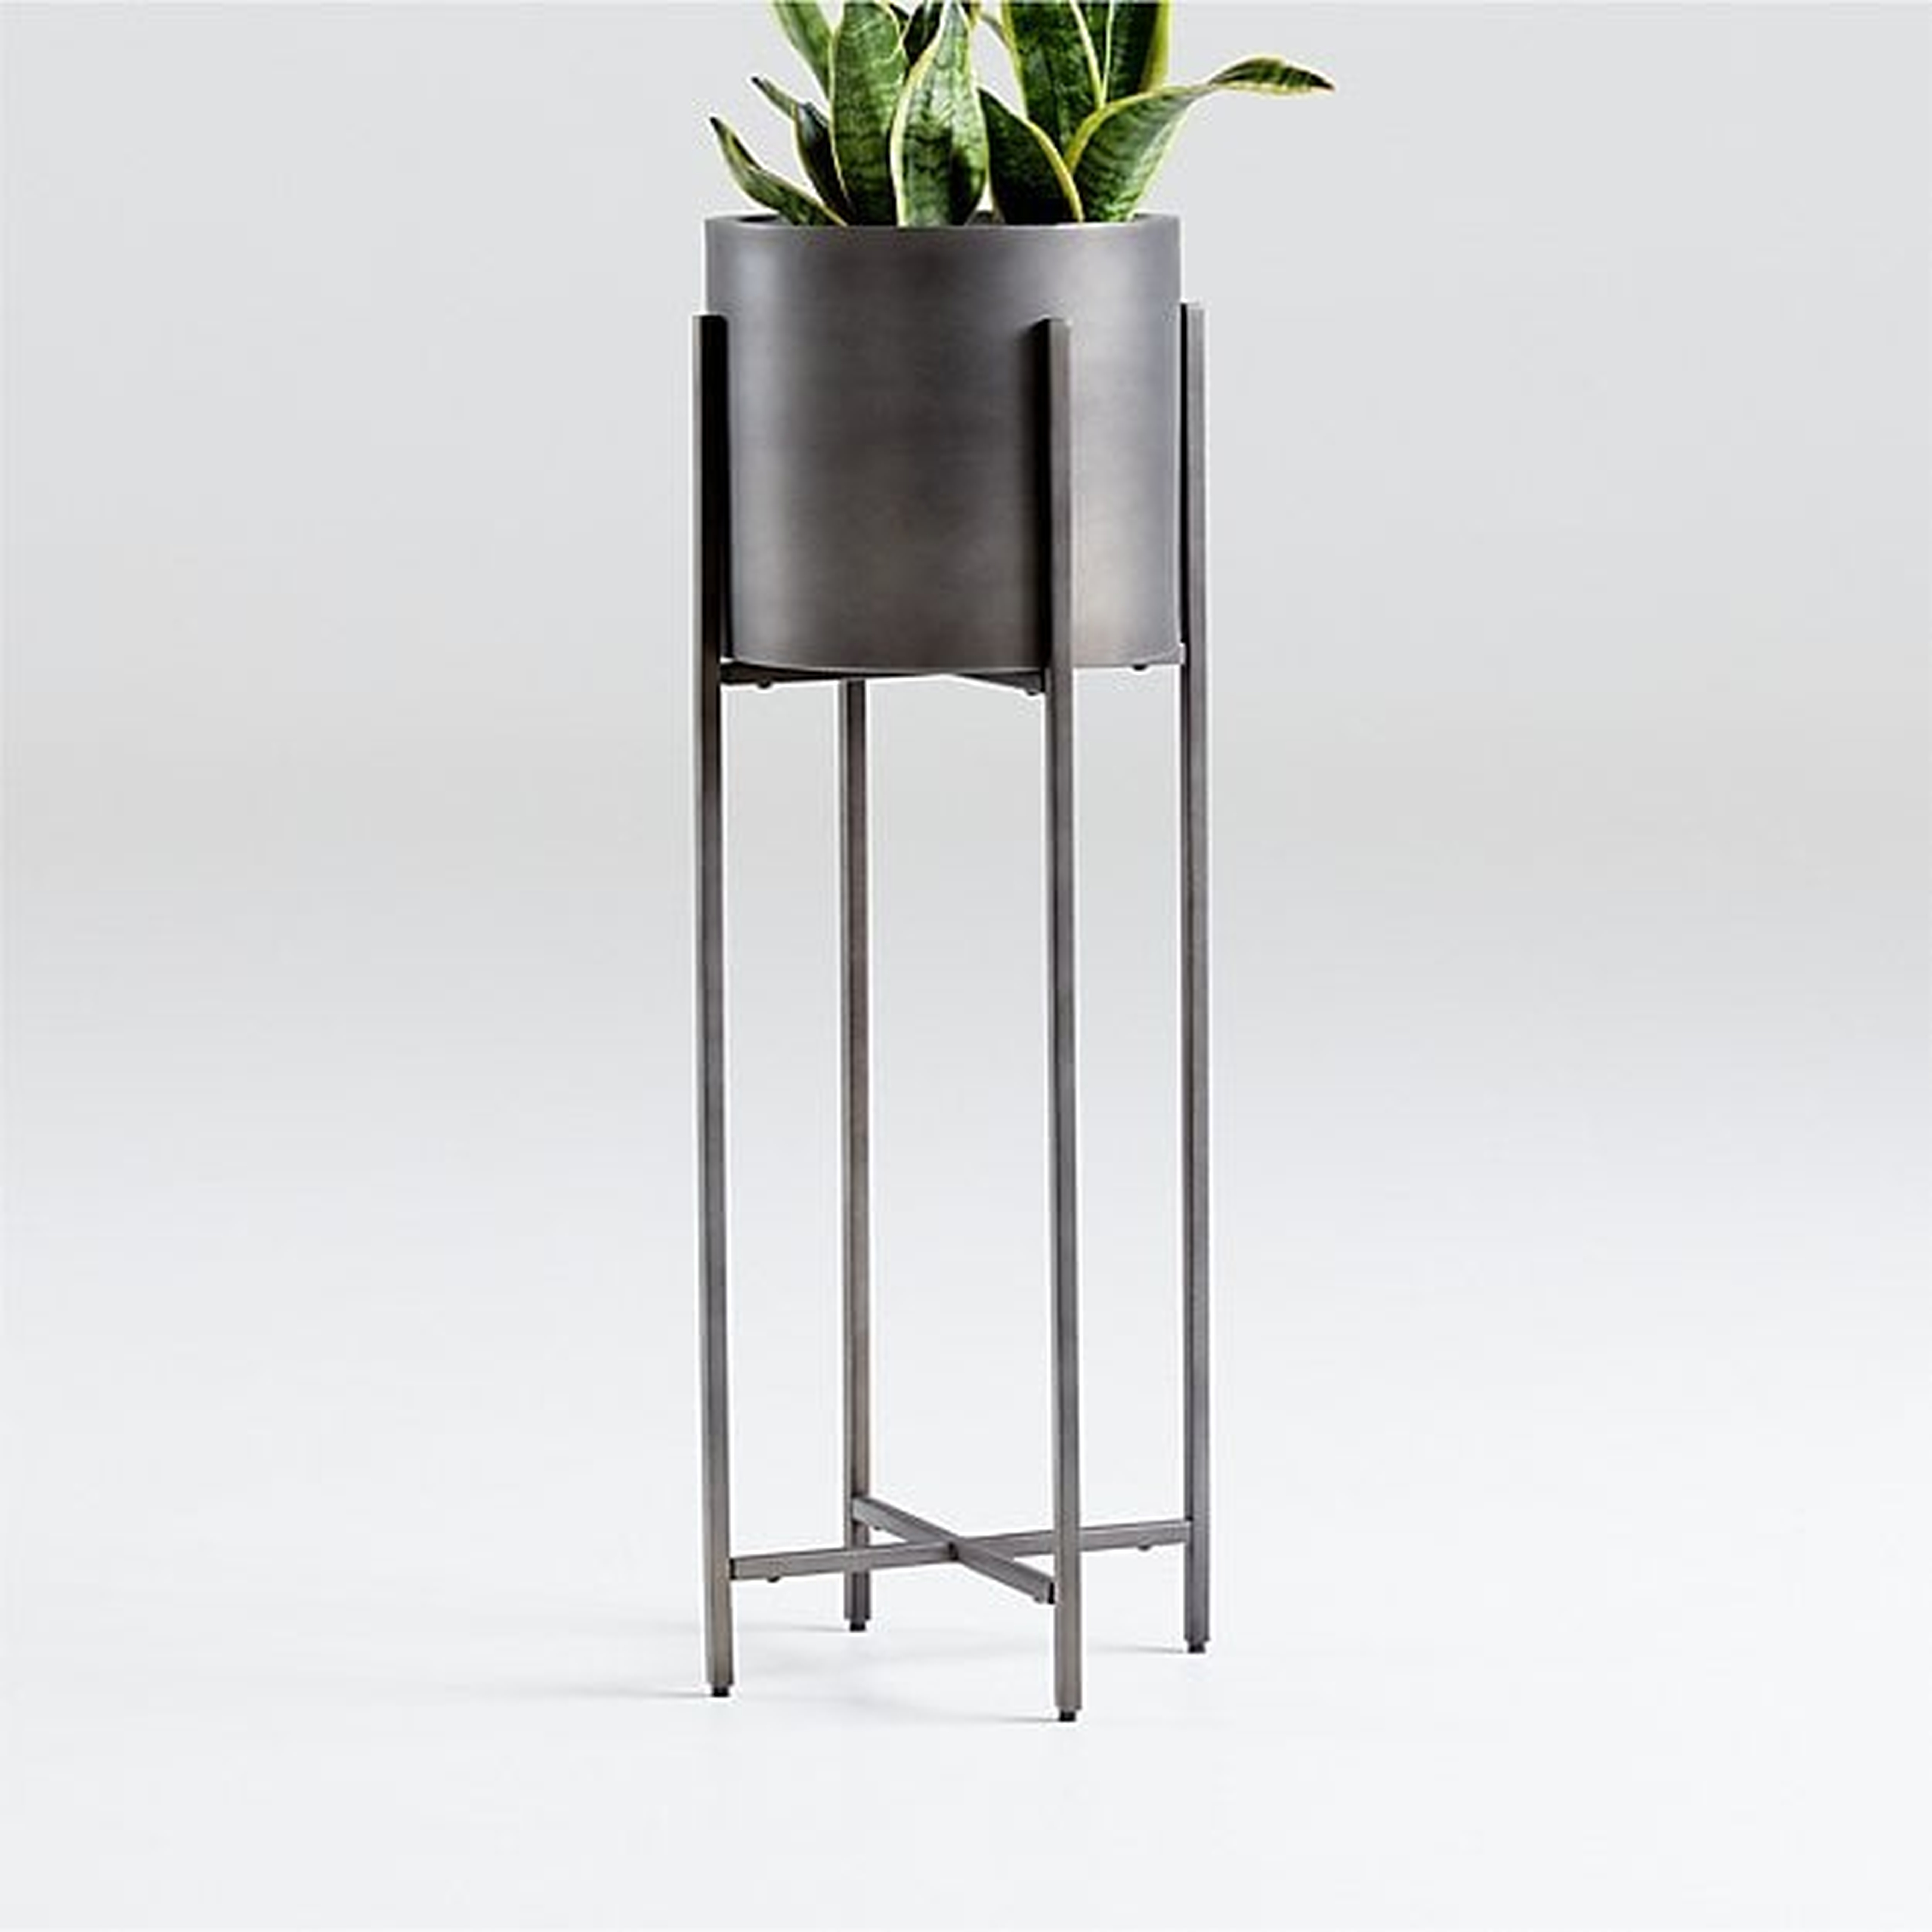 Dundee Bronze Floor Planter with Tall Stand - Crate and Barrel